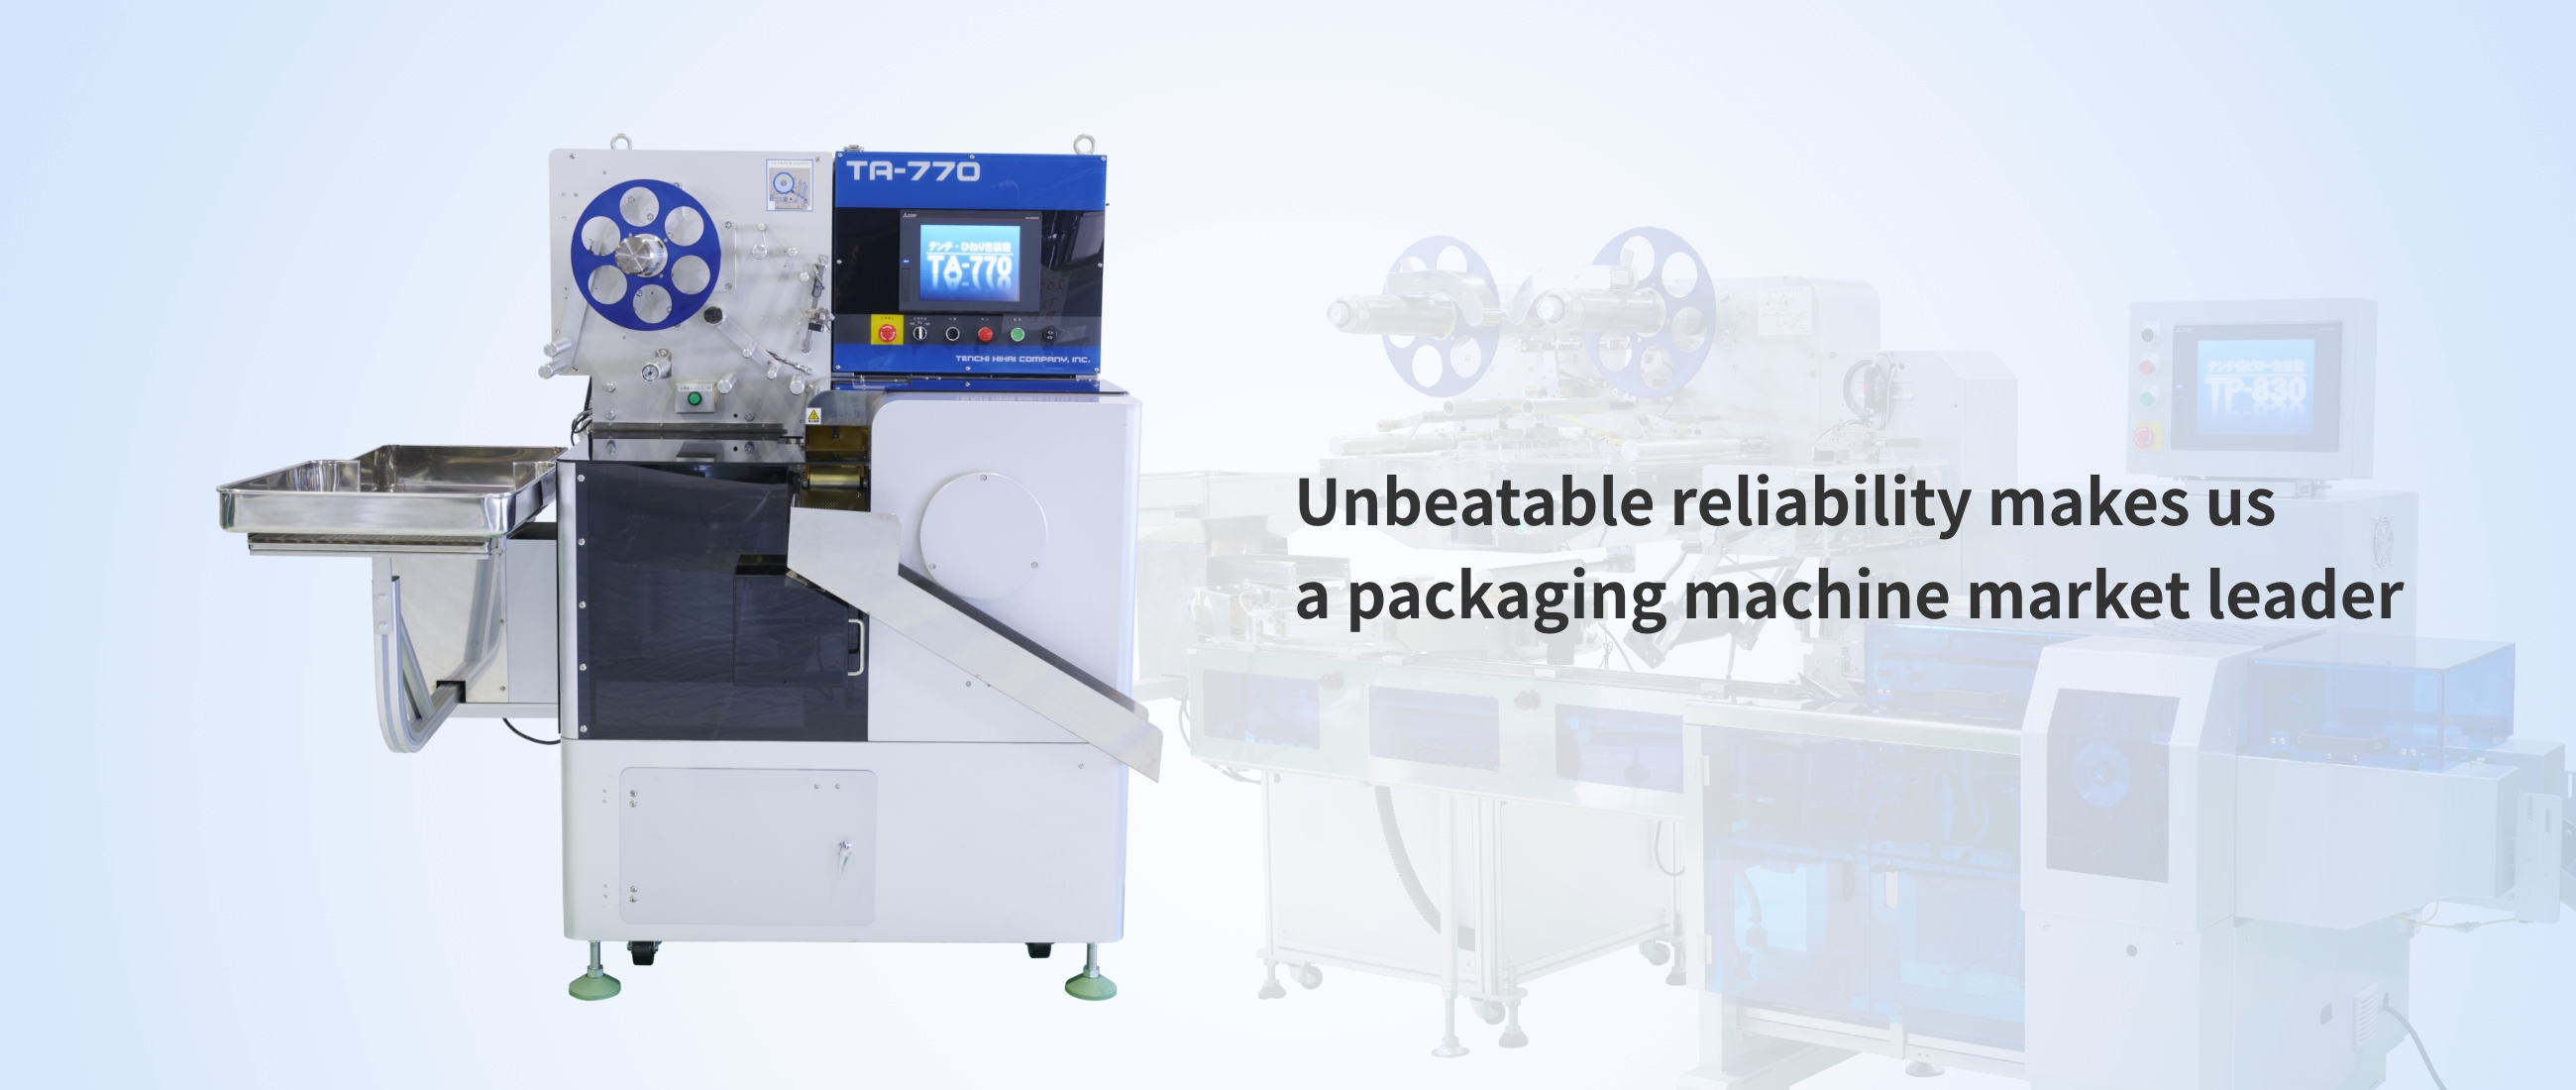 Unbeatable reliability makes us  a packaging machine market leader